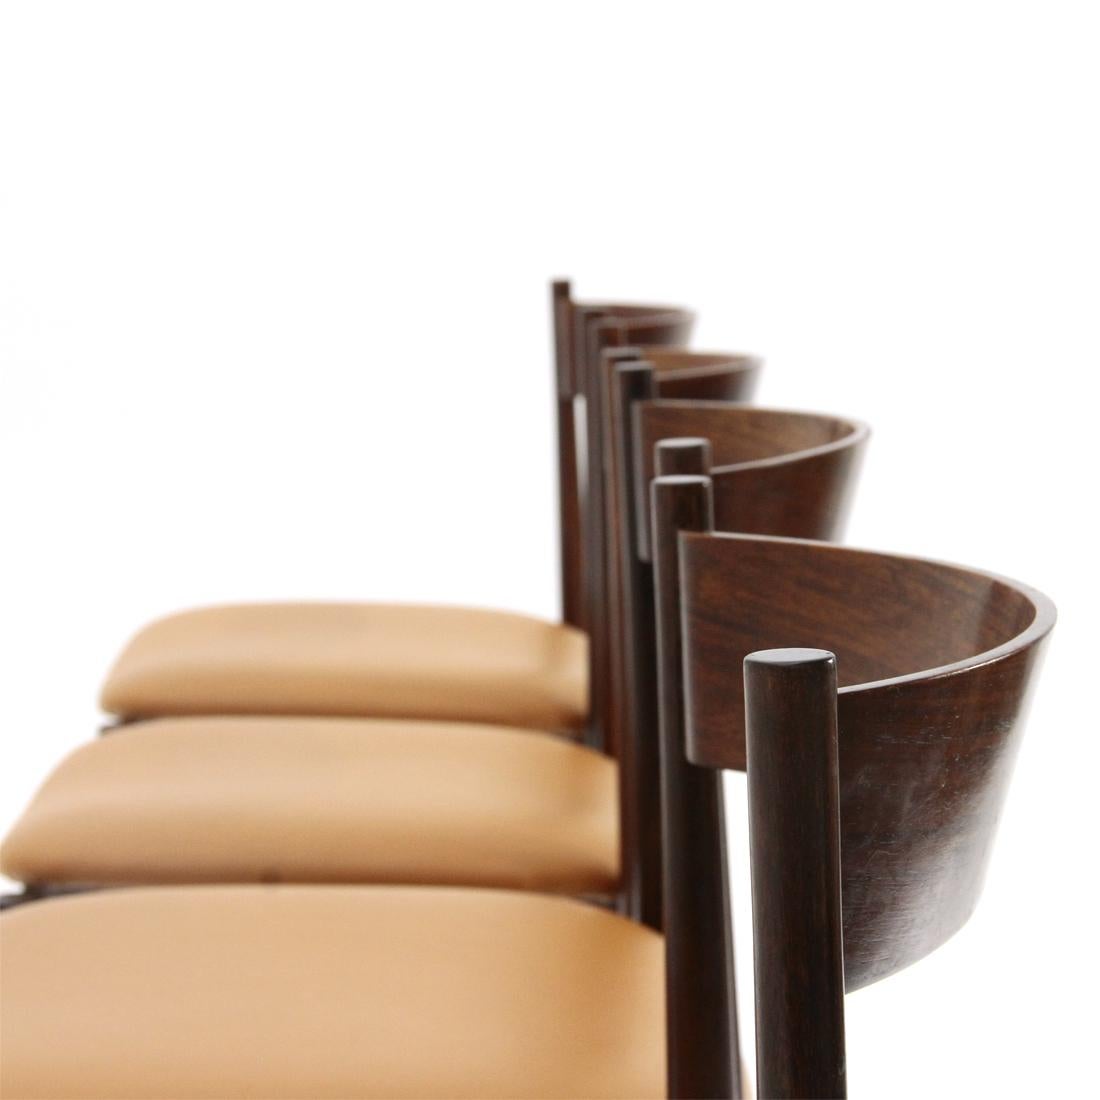 4 '107' Chairs by Gianfranco Frattini for Cassina, 1960s For Sale 1